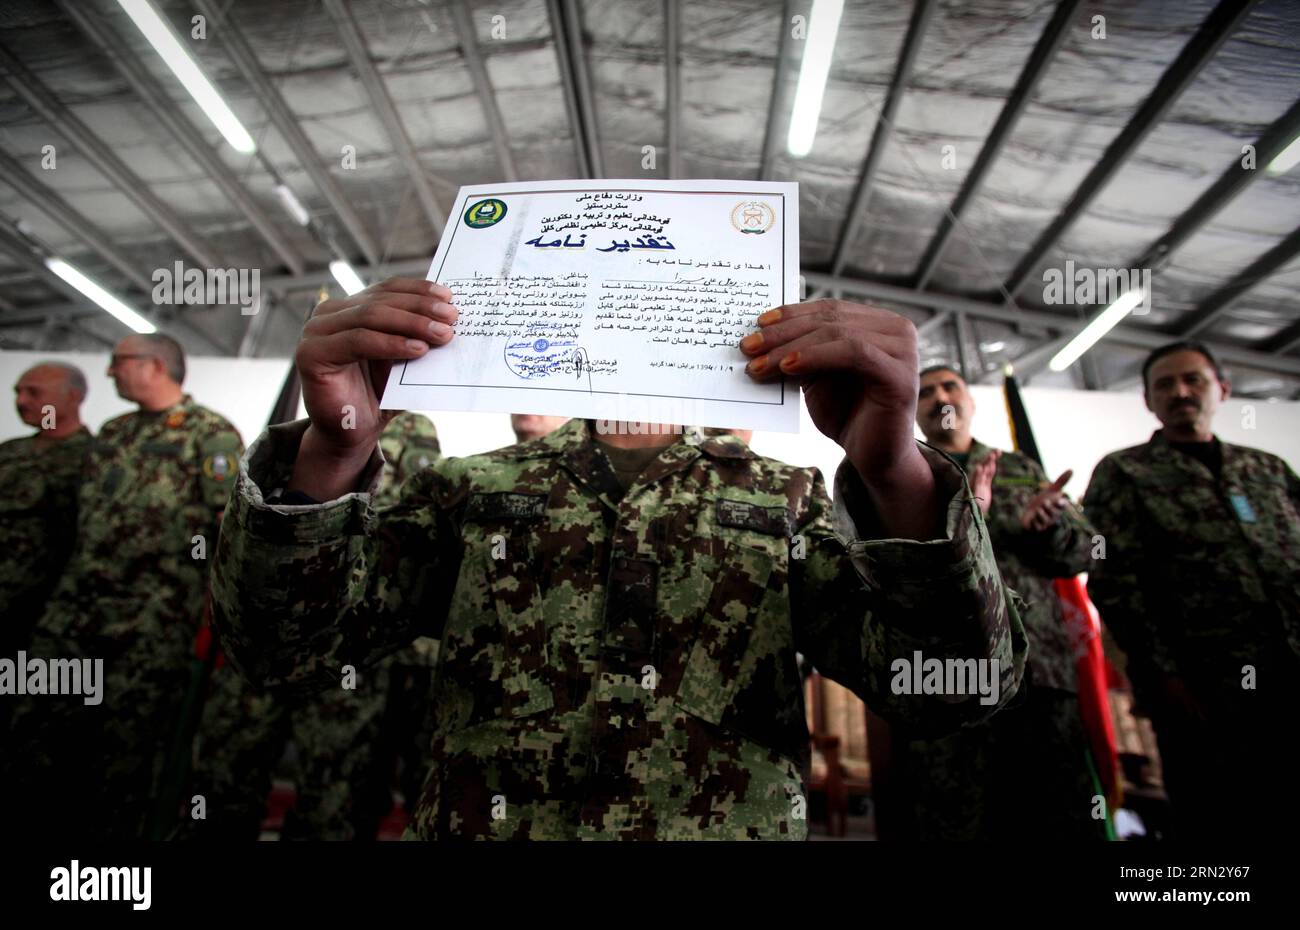 (150329) -- KABUL, March 29, 2015 -- An Afghan new national army soldier shows his certificate during a graduation ceremony at an army training center in Kabul, Afghanistan, March 29, 2015. Around 2,400 soldiers of Afghan national army graduated after four months training in Kabul. ) AFGHANISTAN-KABUL-ARMY AhmadxMassoud PUBLICATIONxNOTxINxCHN   Kabul March 29 2015 to Afghan New National Army Soldier Shows His Certificate during a Graduation Ceremony AT to Army Training Center in Kabul Afghanistan March 29 2015 Around 2 400 Soldiers of Afghan National Army graduated After Four MONTHS Training i Stock Photo